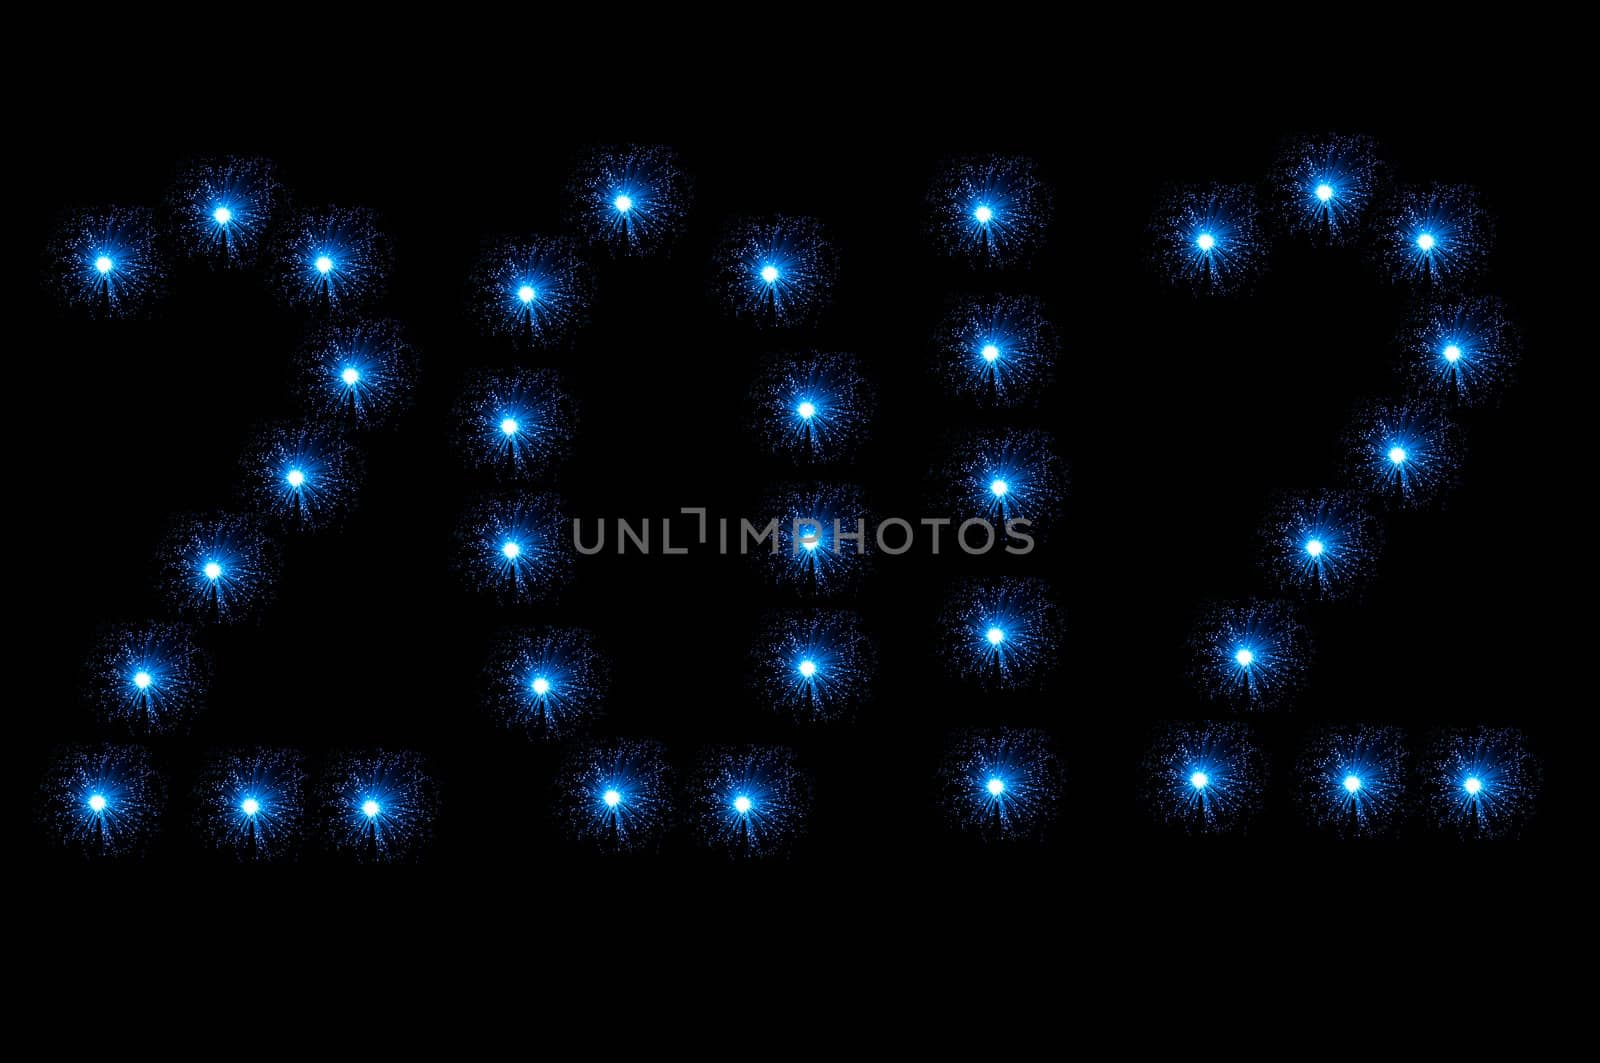 Many small illuminated blue fibre optic lamps arranged on black background to spell the number 2012